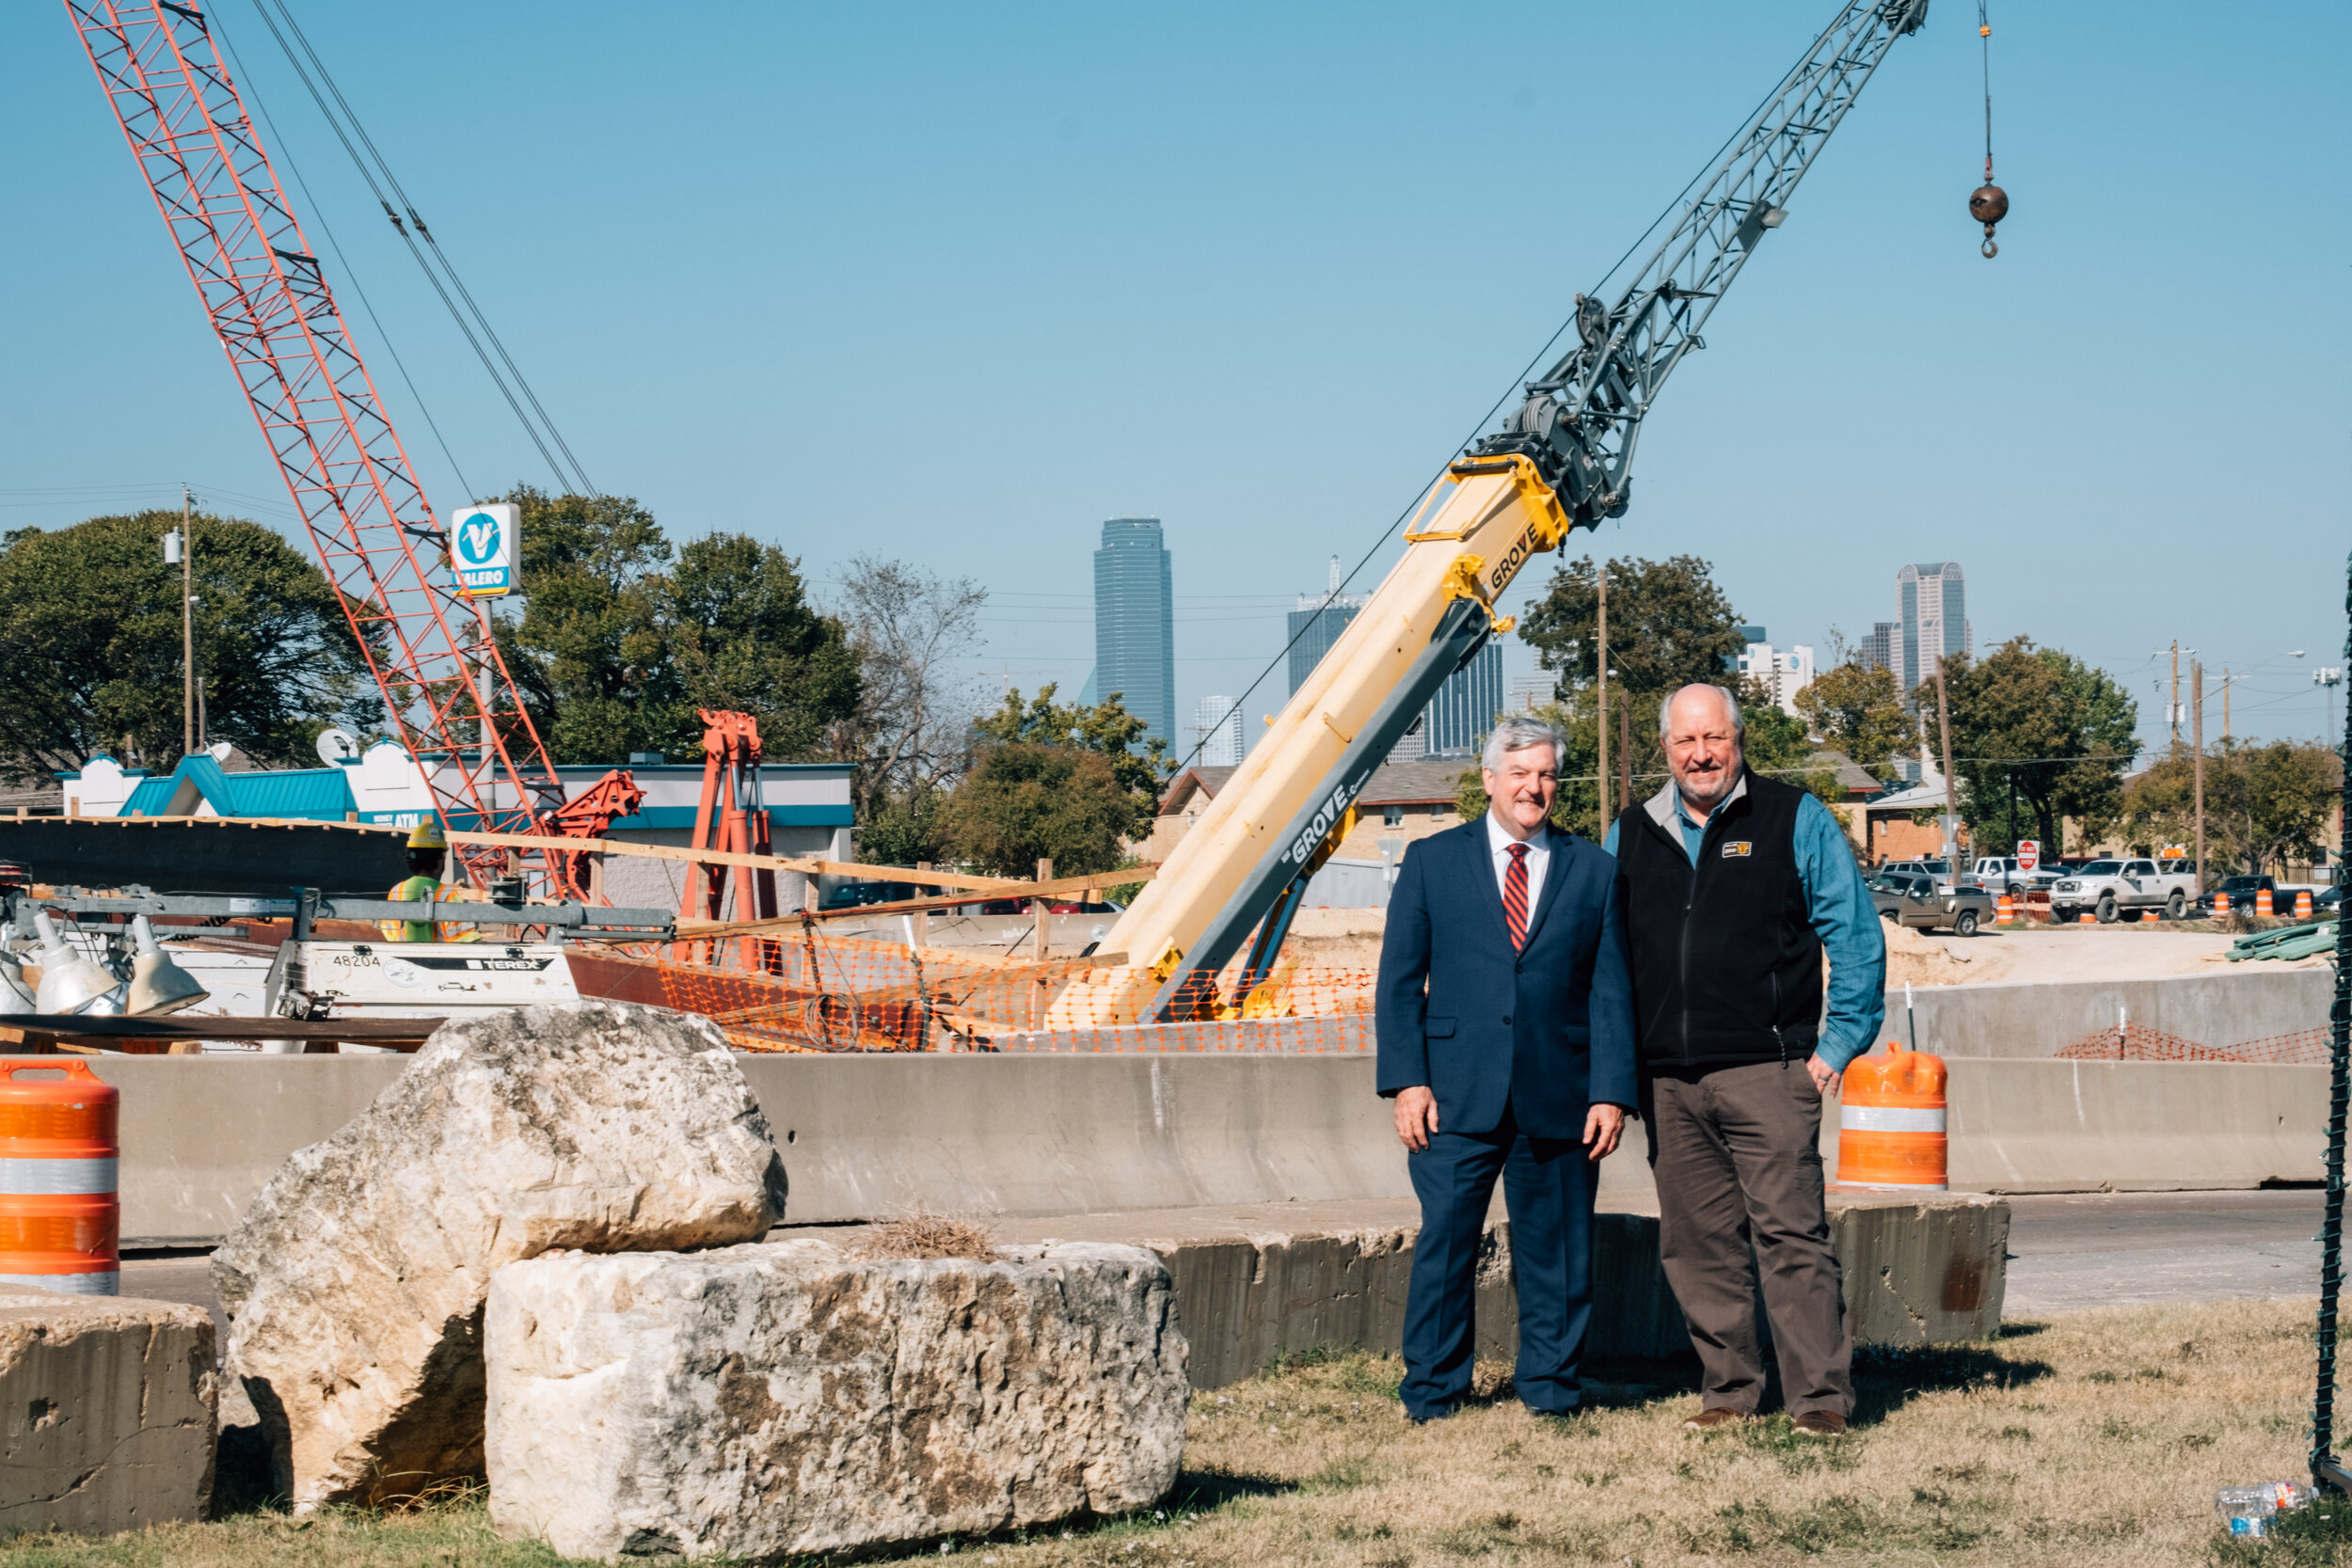 Mike Gruber (L) with Gregg Hudson (R), Dallas Zoo President and CEO.